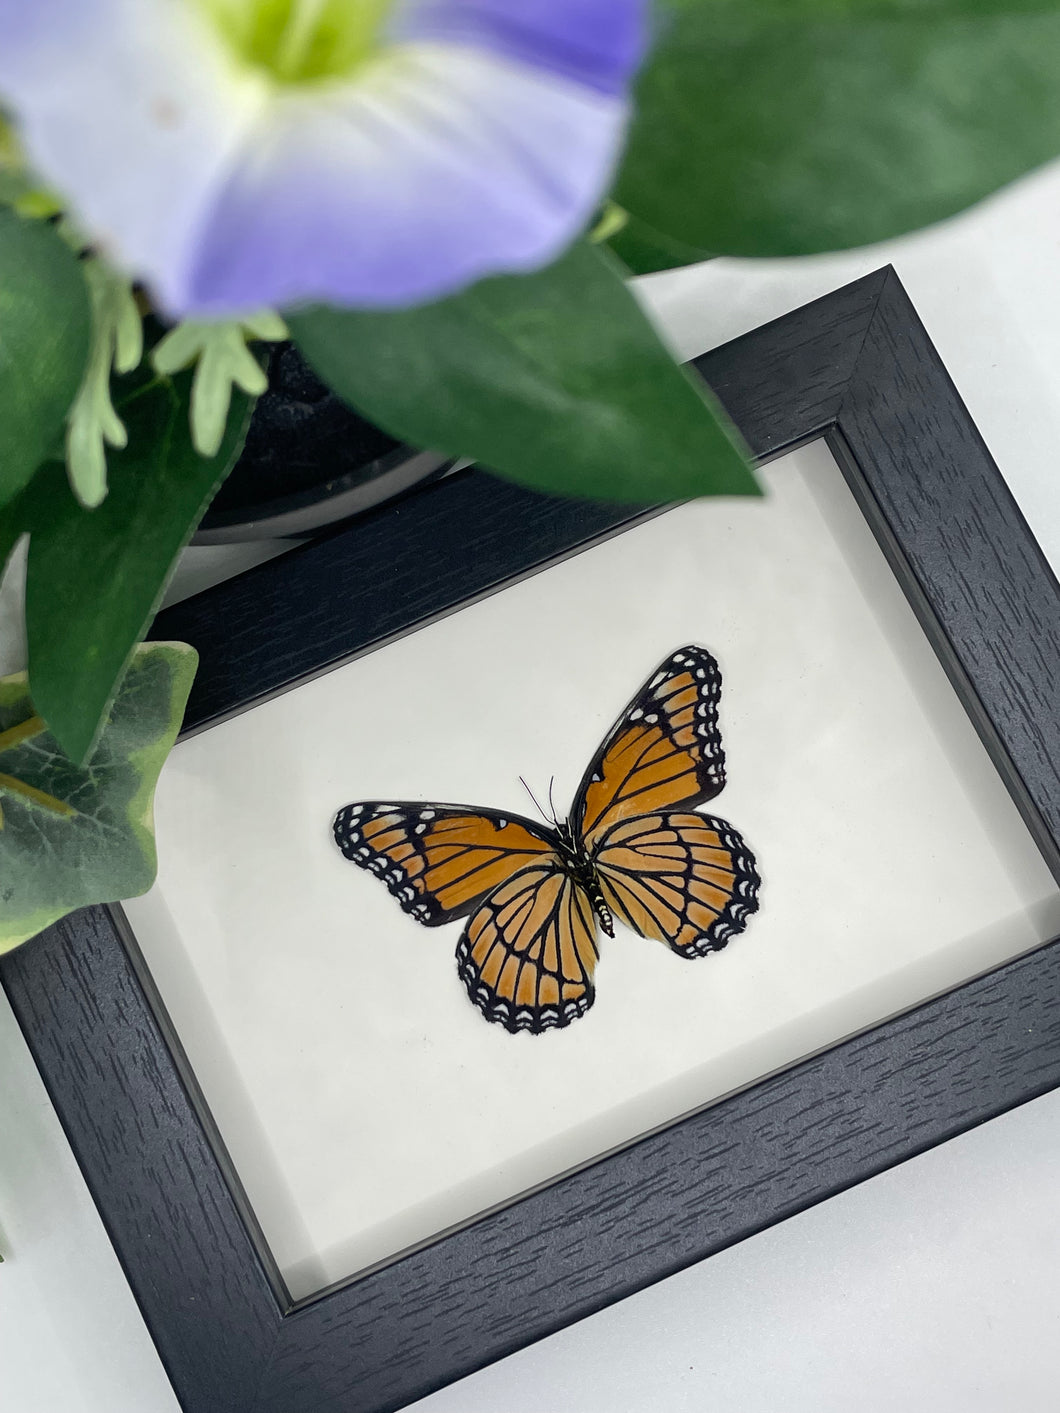 Viceroy Butterfly in a frame